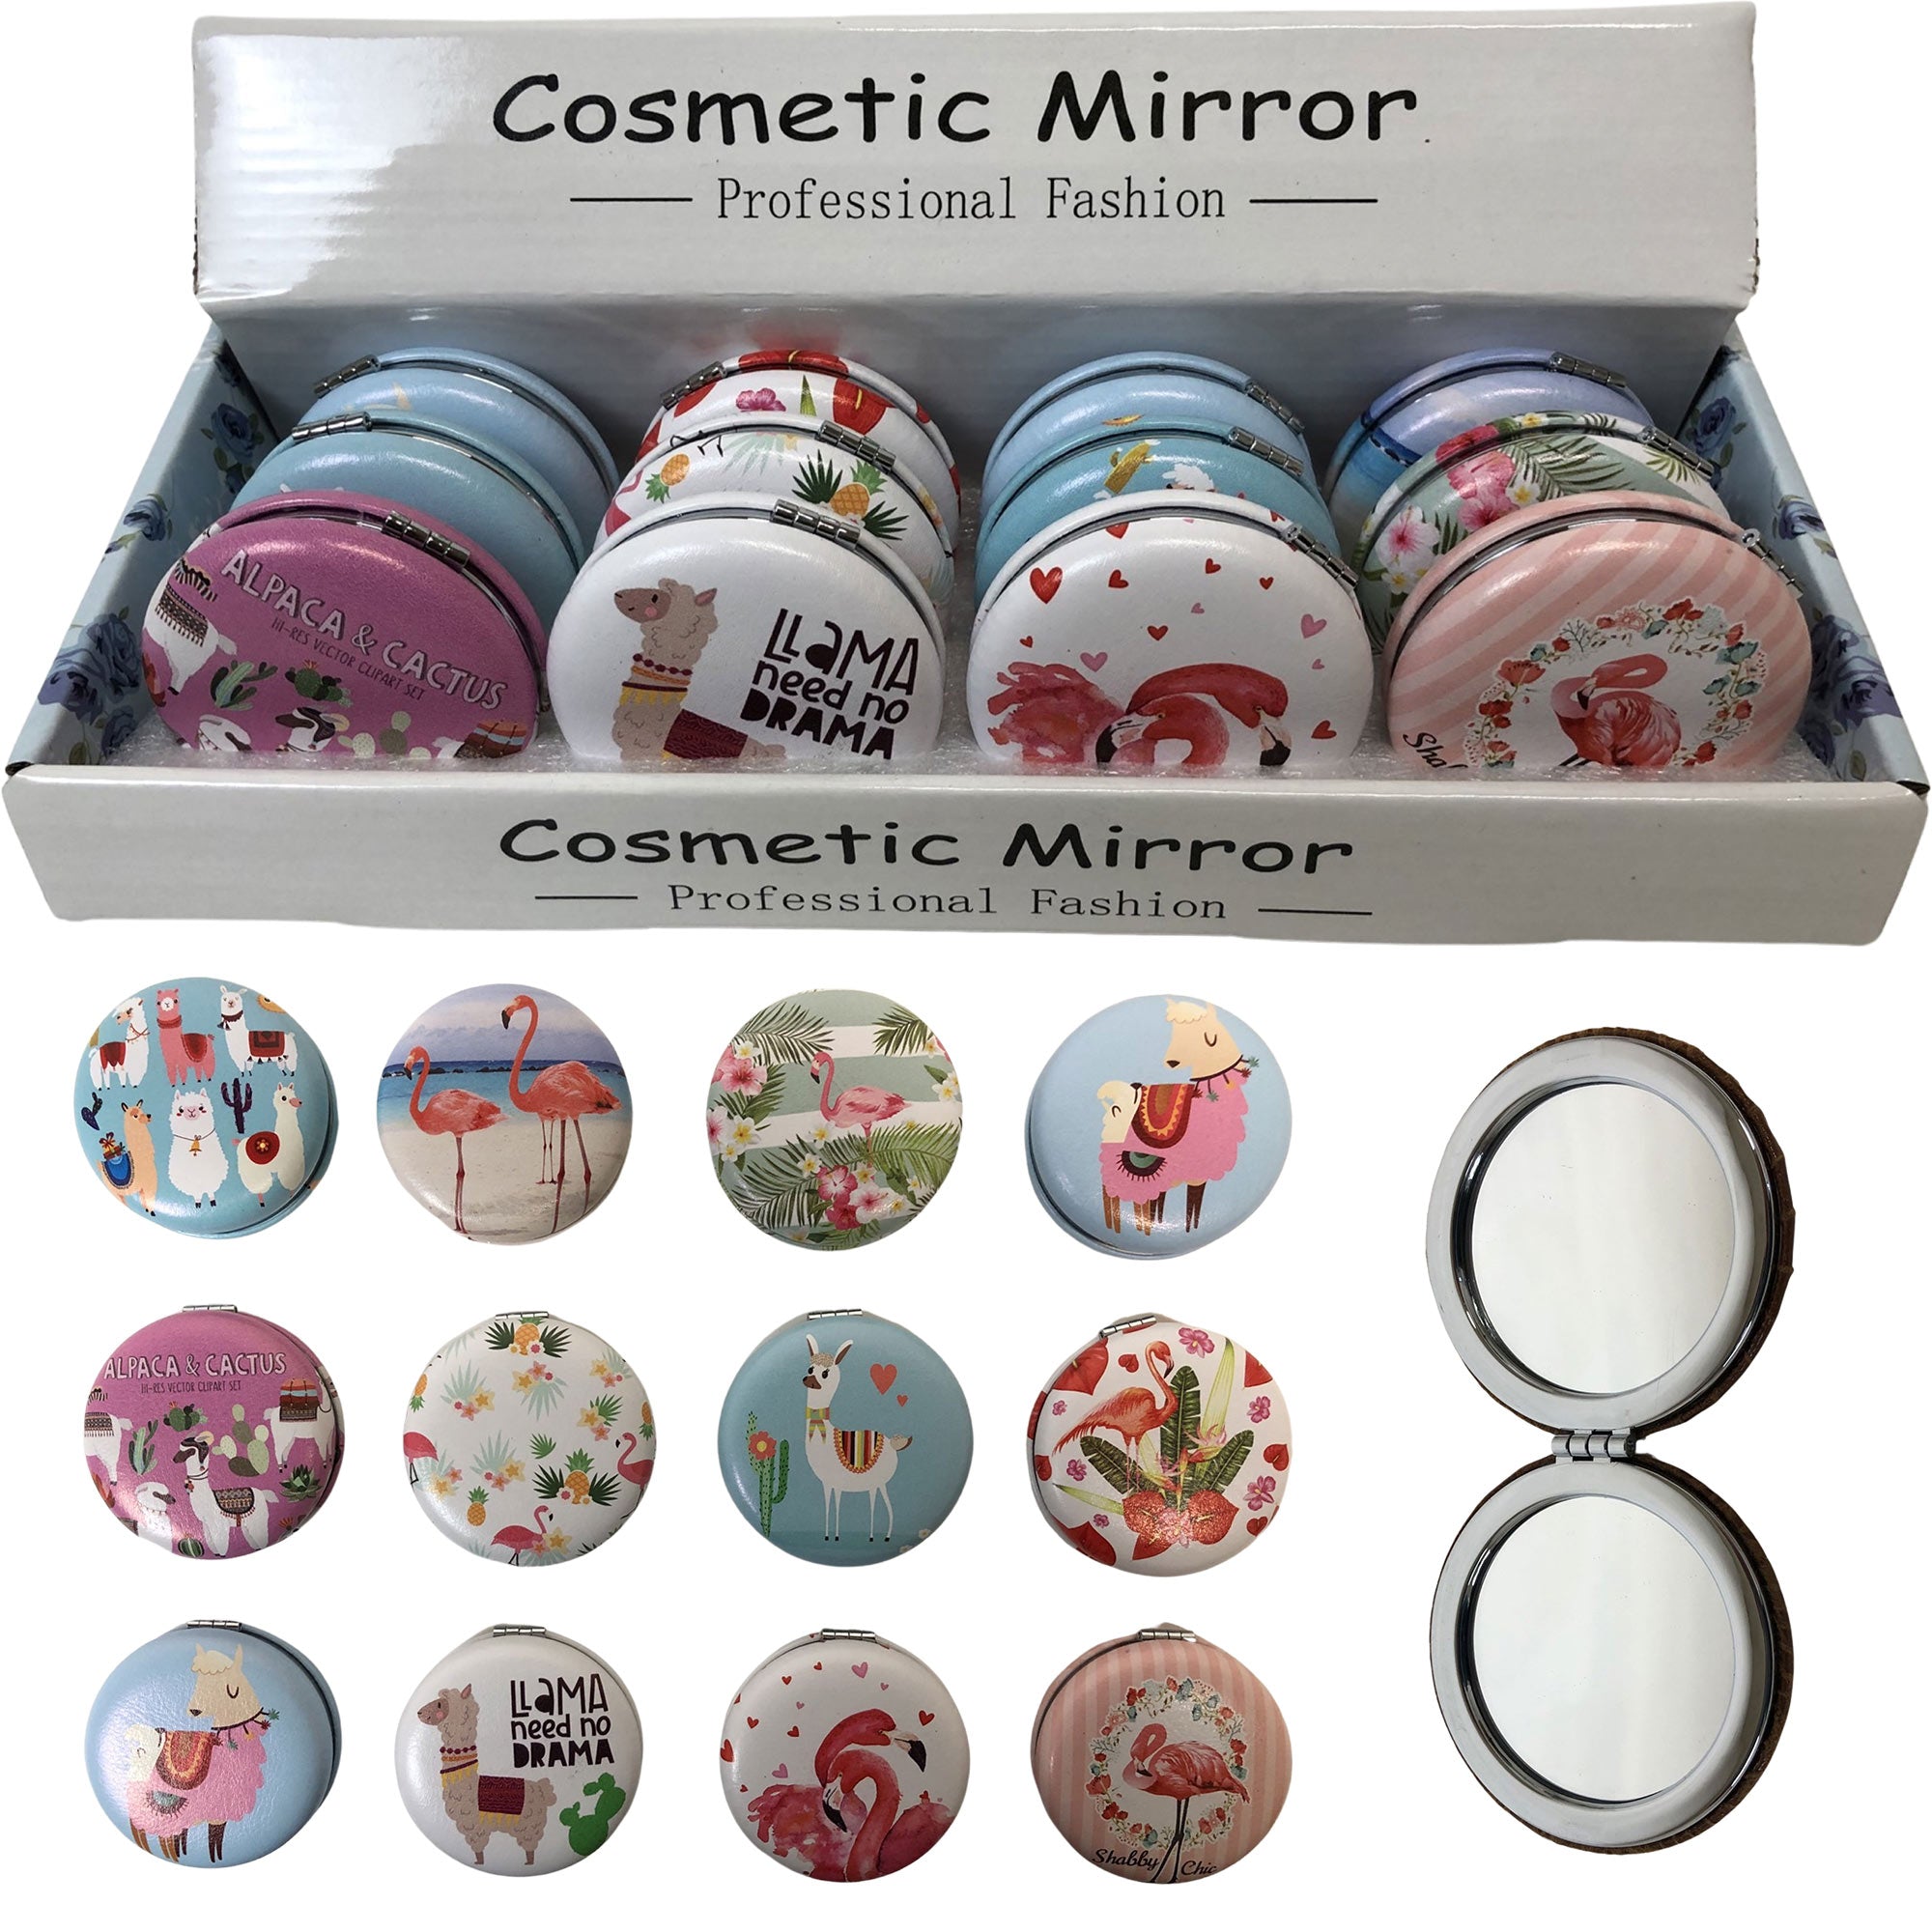 CLEARANCE ROUND COSMETIC LLAMA & FLAMINGO PRINTS (CASE OF 48 - $1.50 / PIECE)  Wholesale Cosmetic Mirrors in Assorted Prints SKU: 909-LAMA/FLAM-48